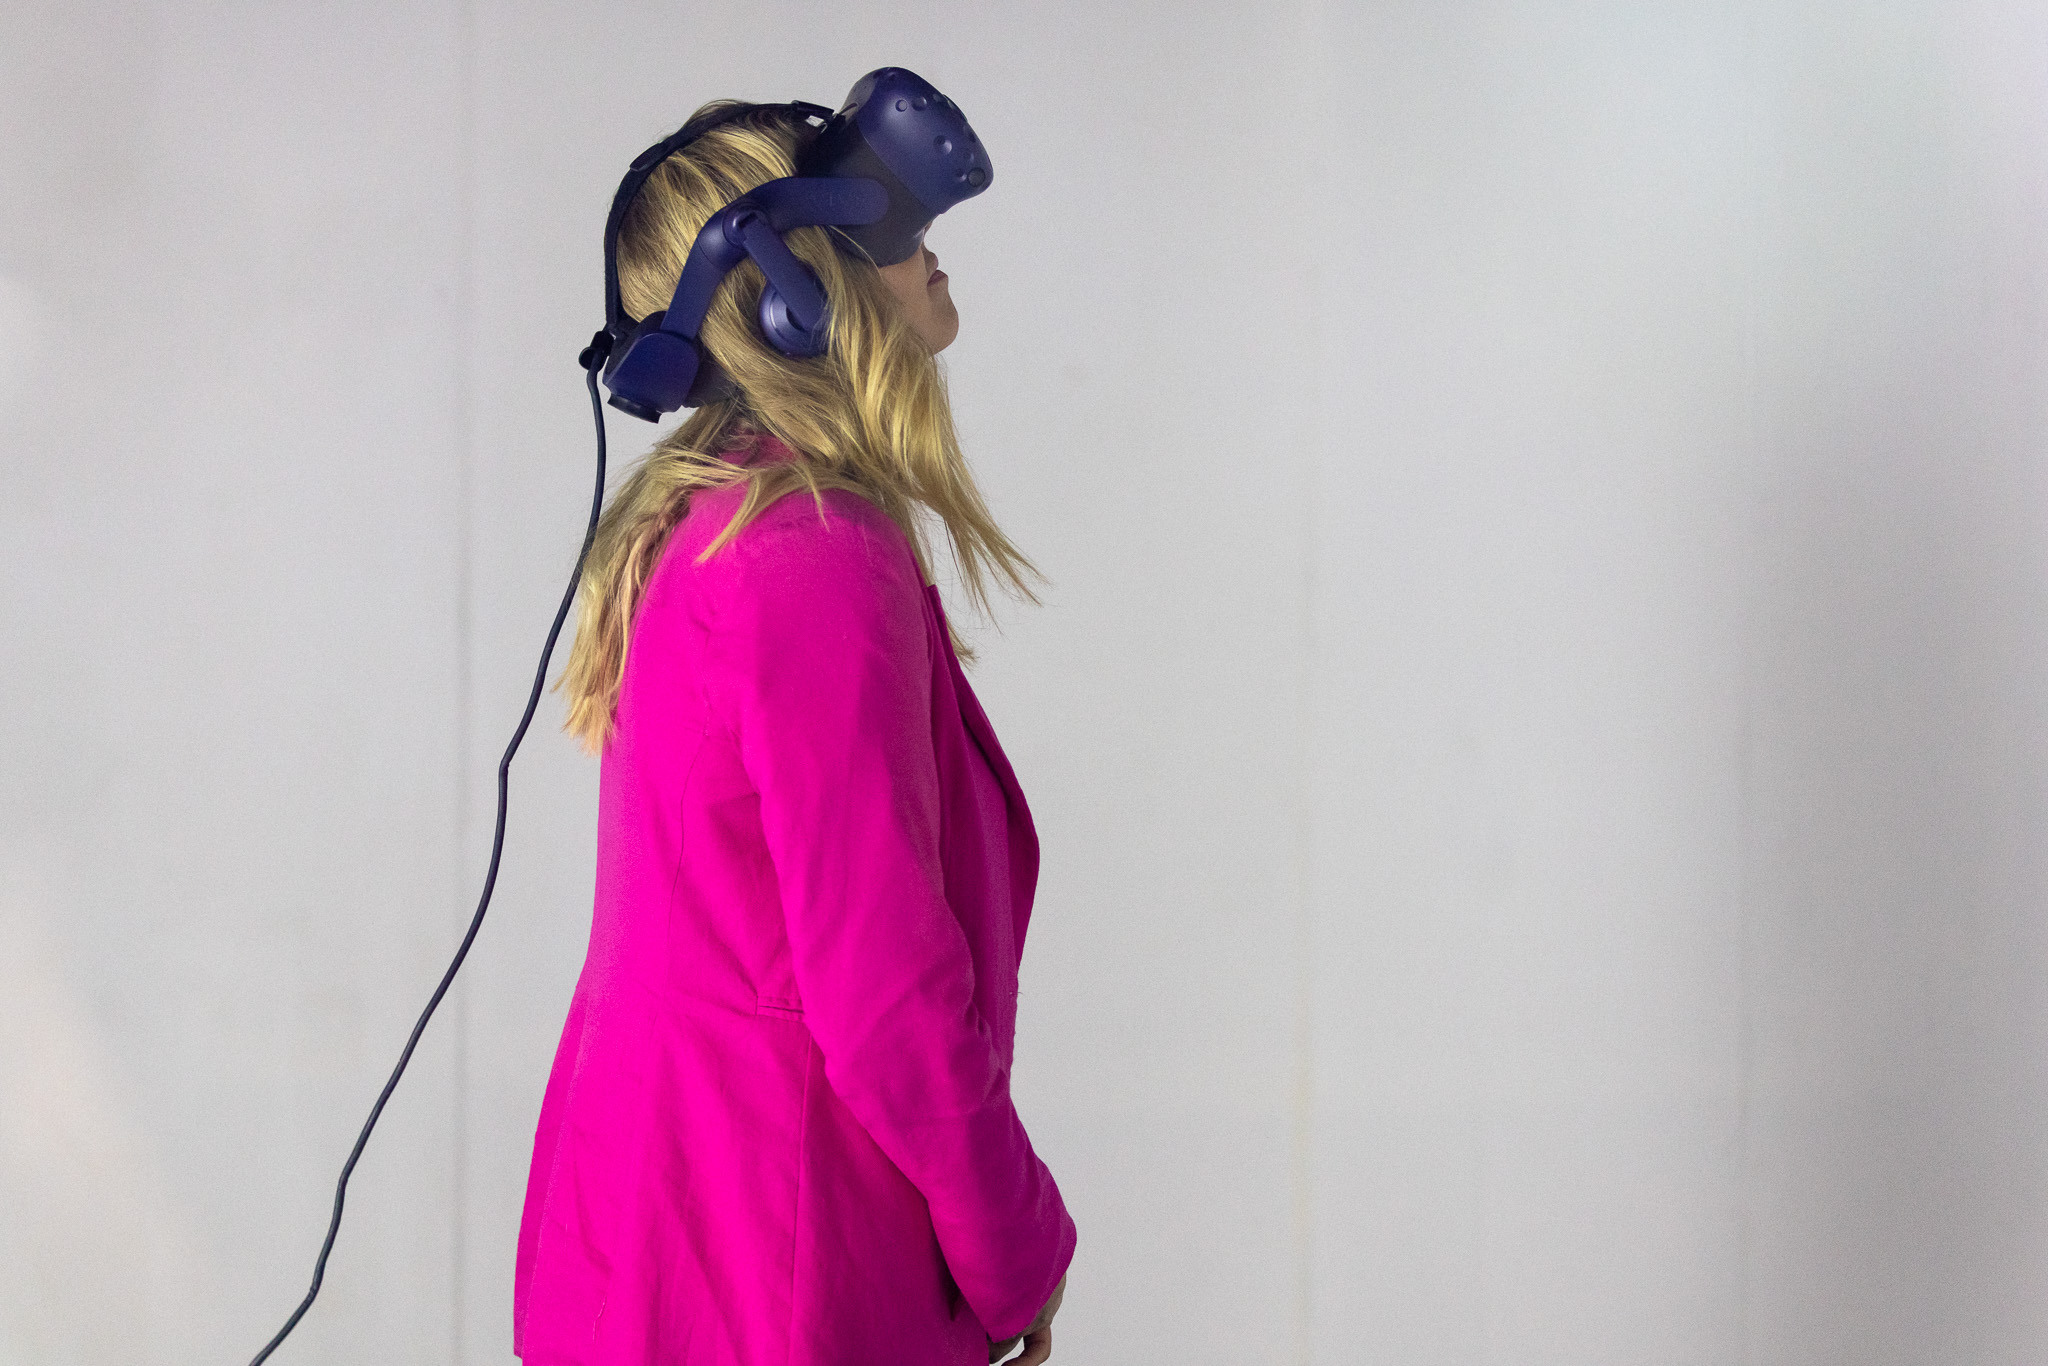 A blonde haired woman in a pink cardigan wears a purple virtual reality headset standing side profile in front of white wall